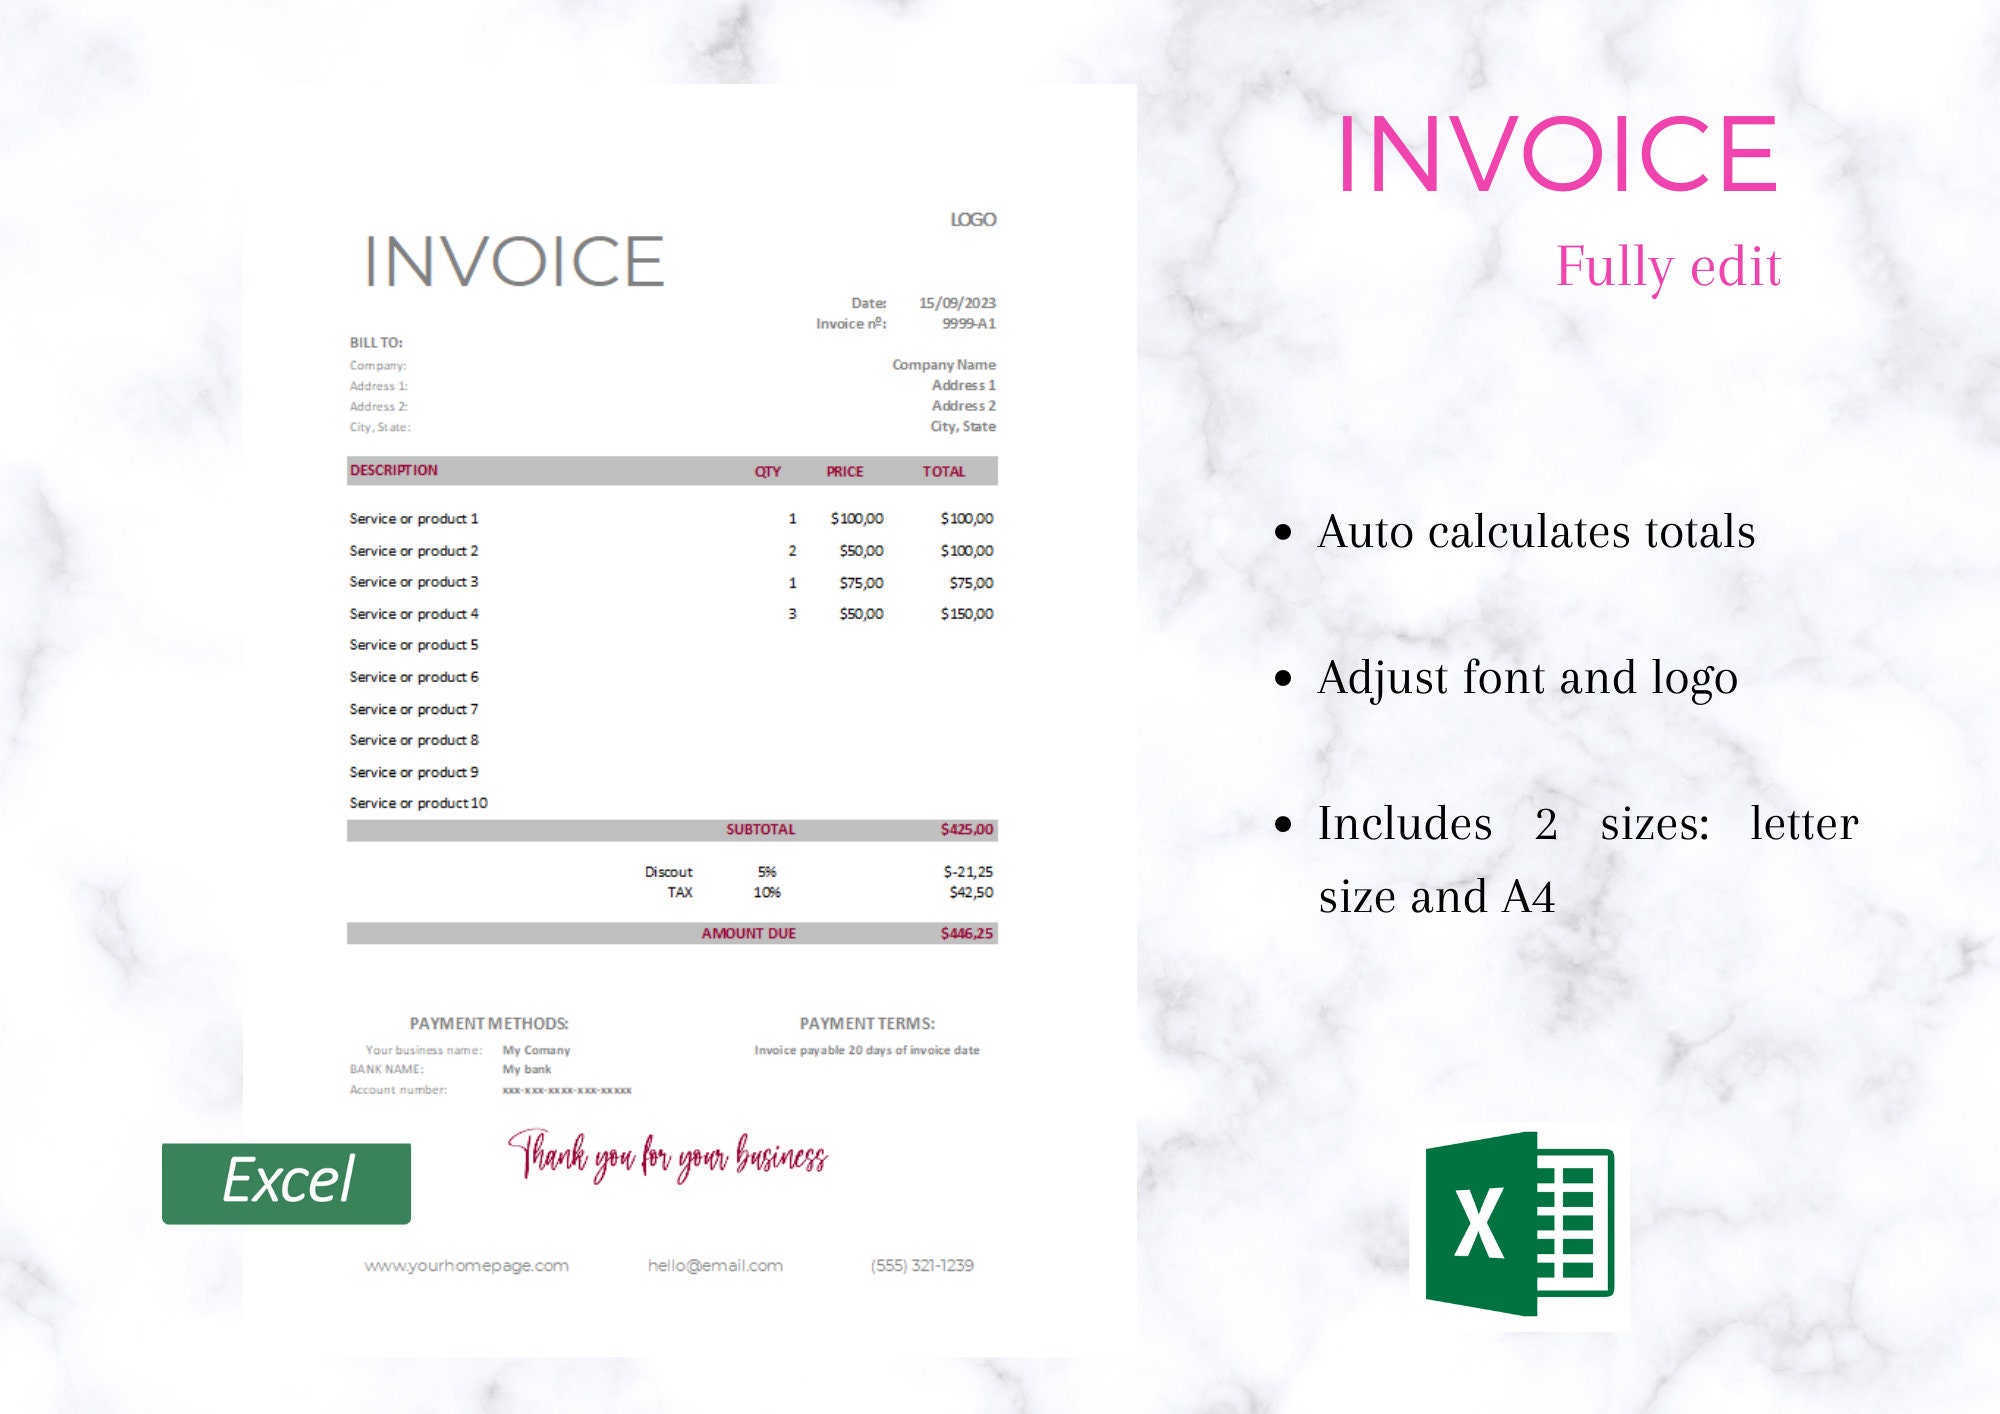 Is There An Invoice Template In Excel